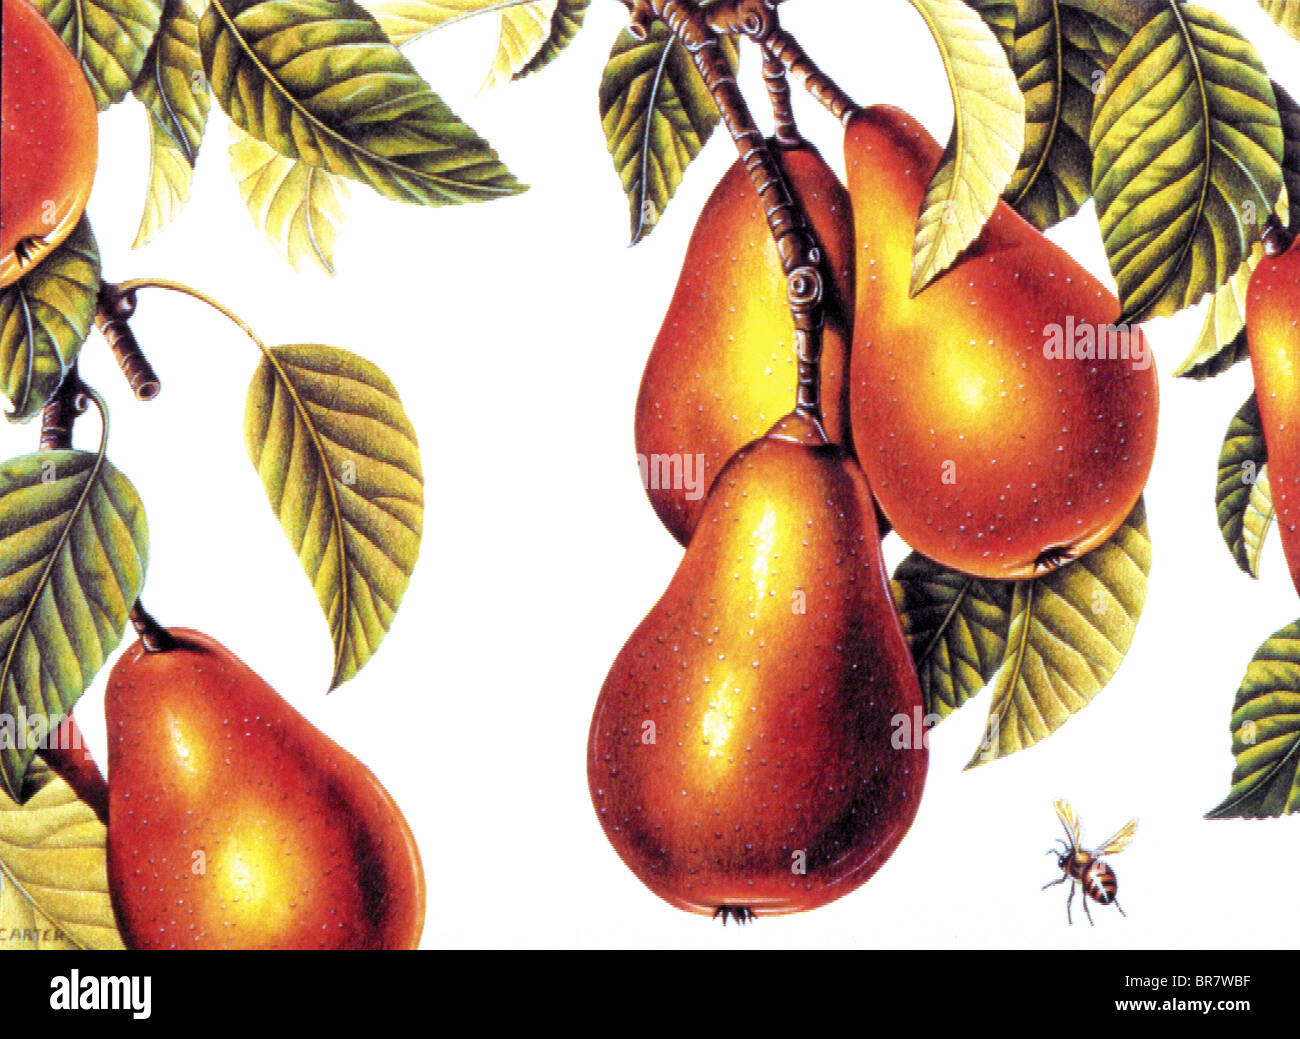 Illustration of pears on the vine Stock Photo